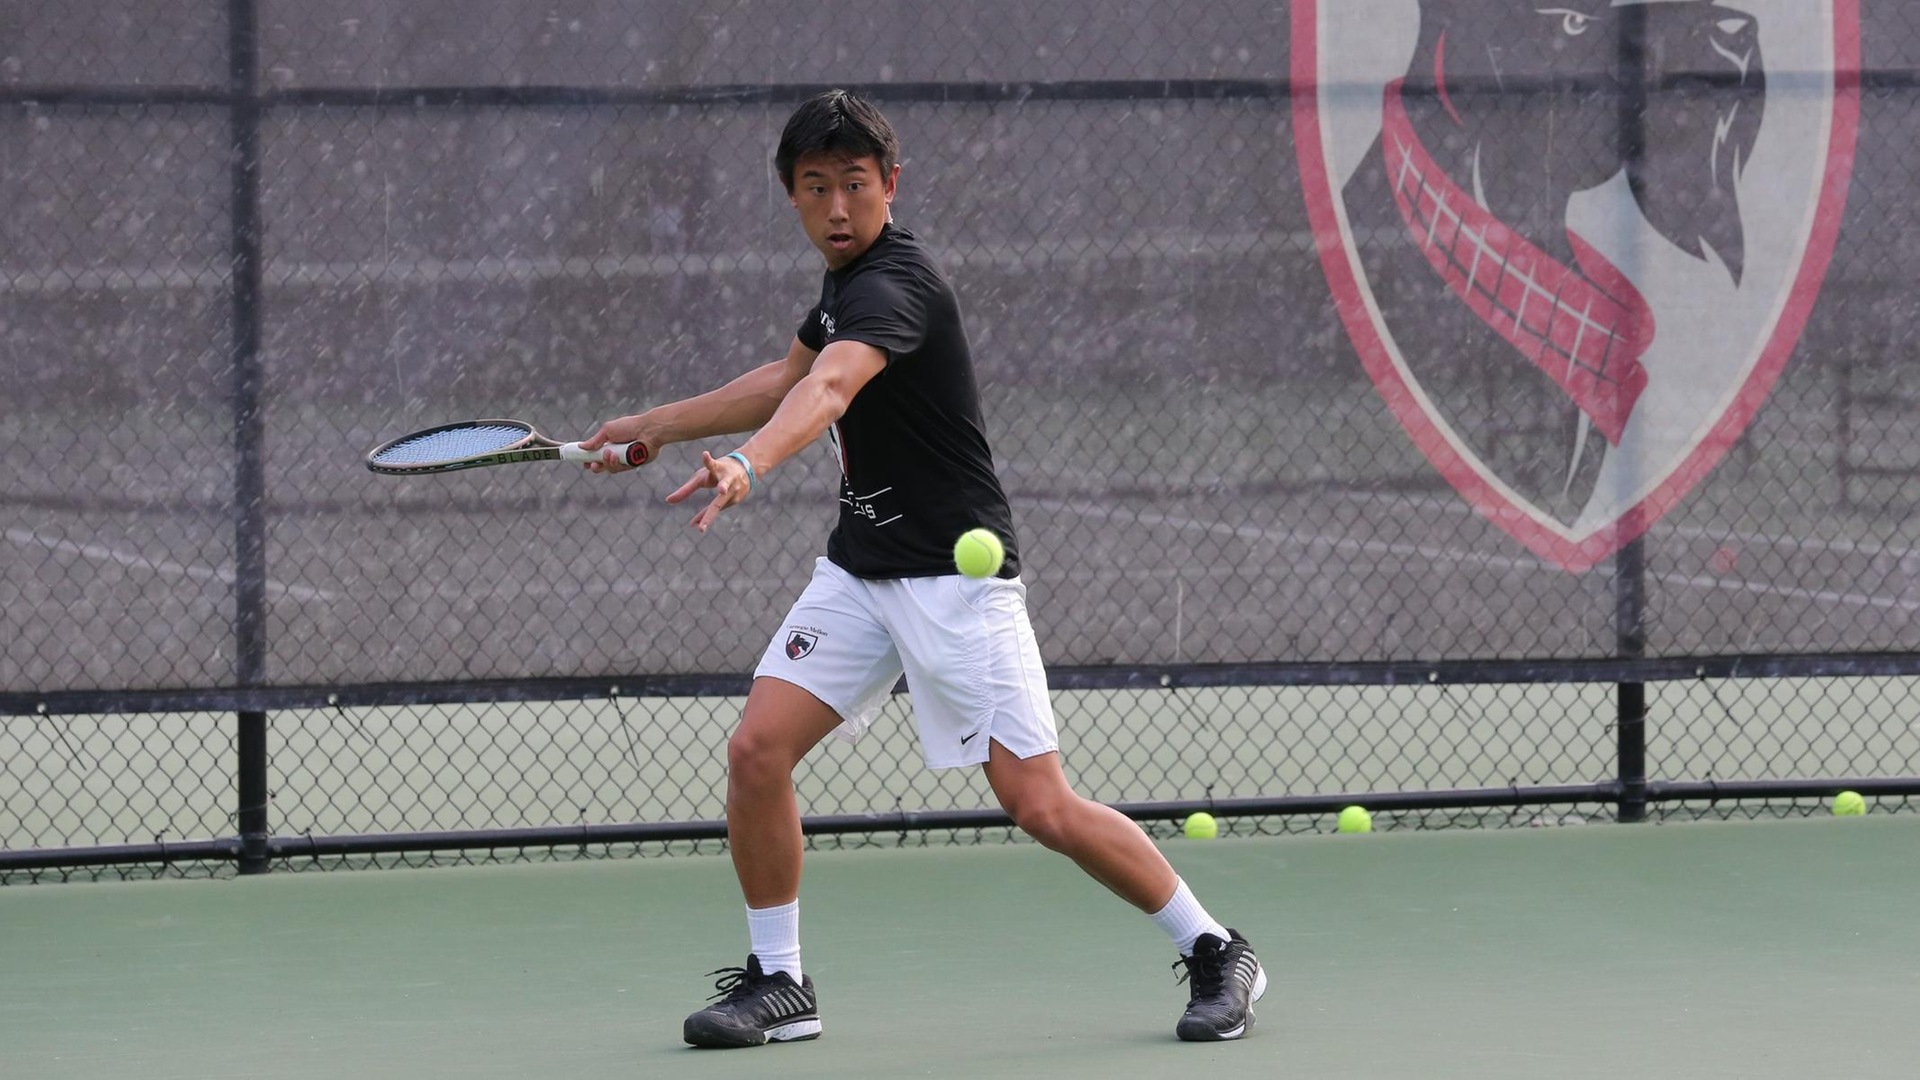 men's tennis player wearing a black shirt with white shorts about to swing his racquet